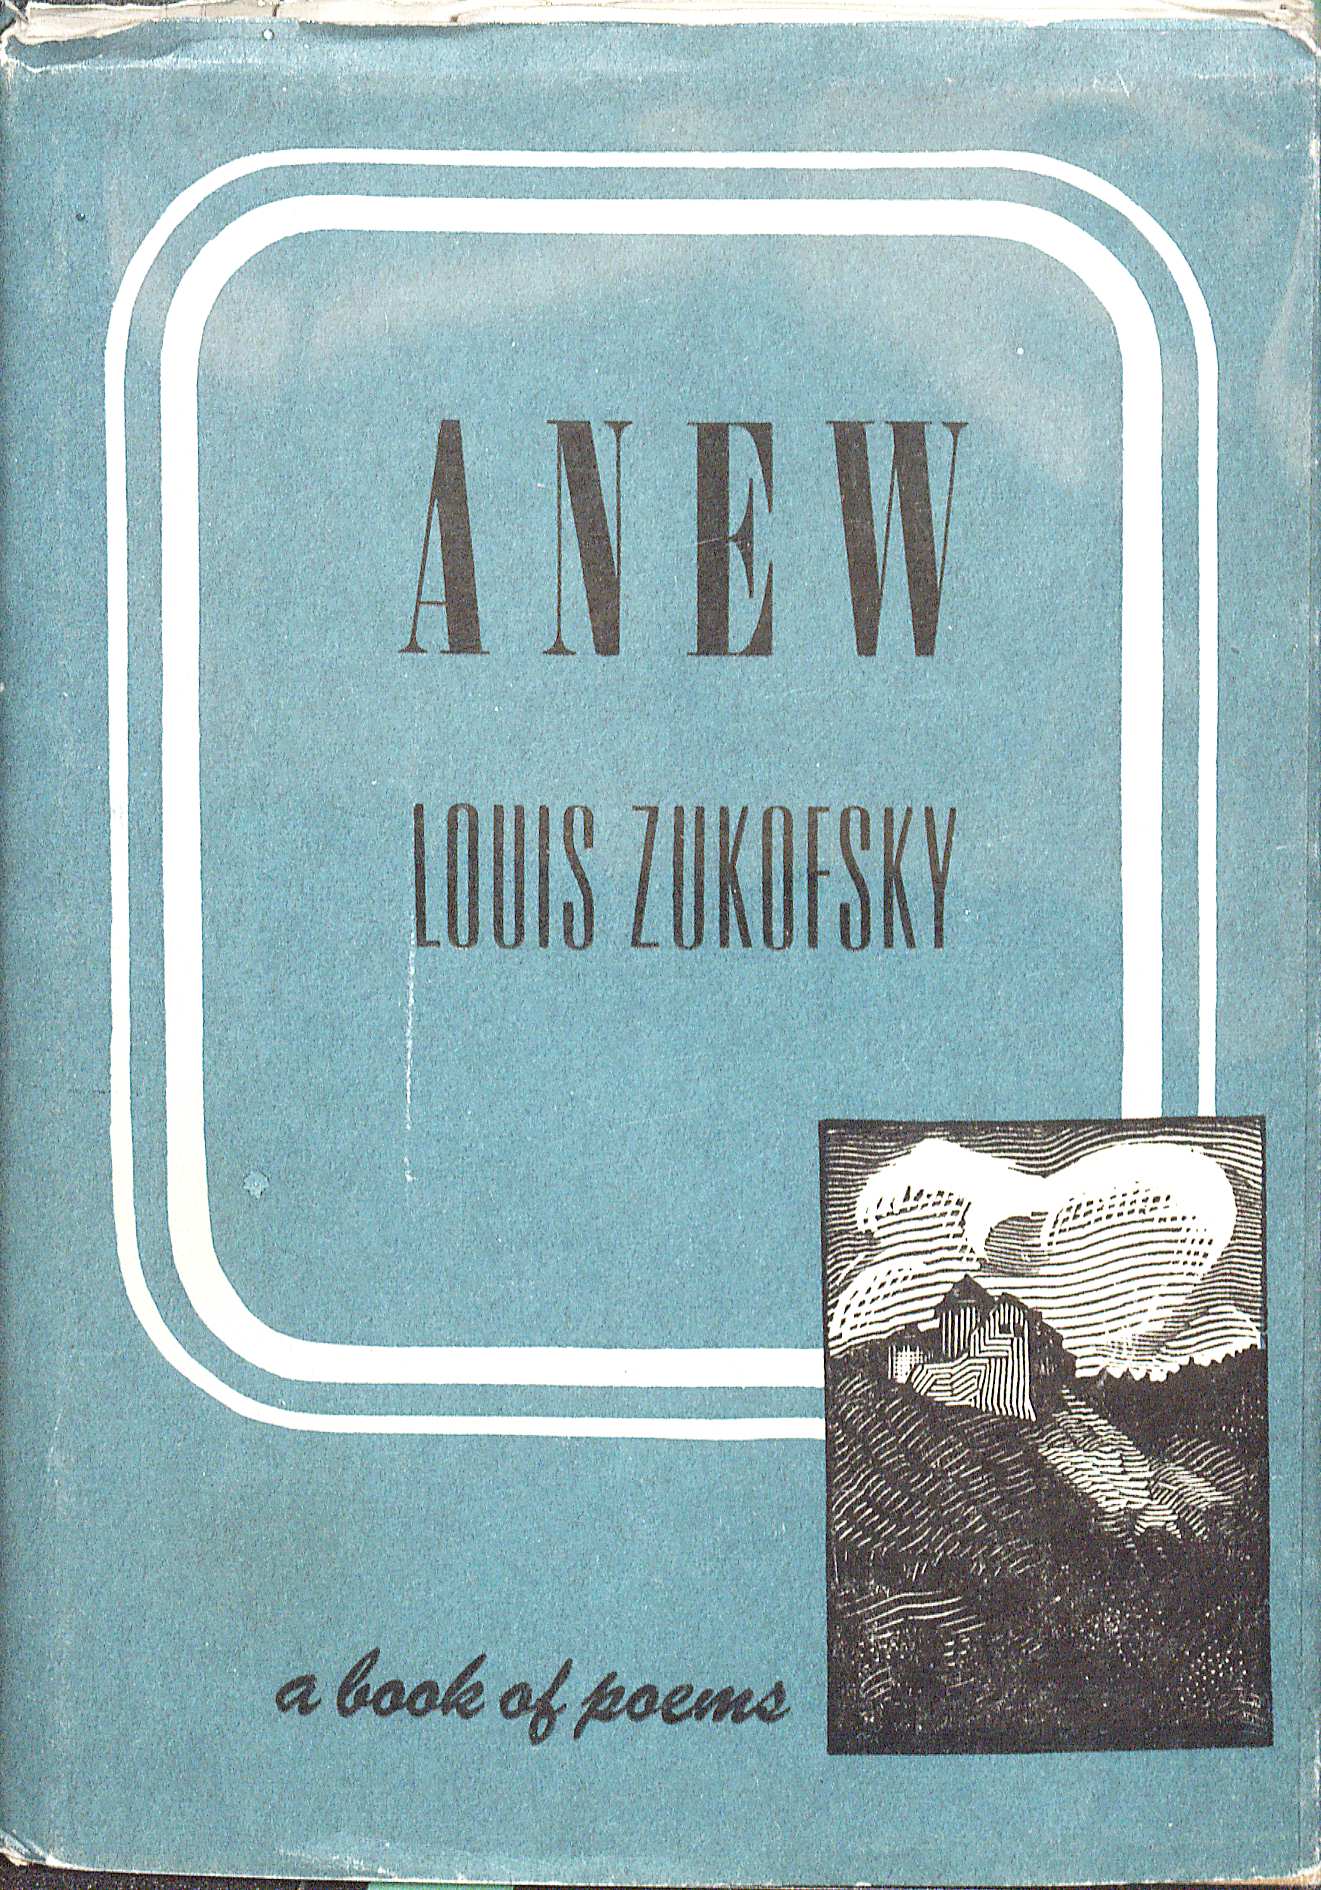 1946 copy of ANEW (PS3549 .U47A8 1946. Gift of Marvin Tatum. Image by Petrina Jackson.)